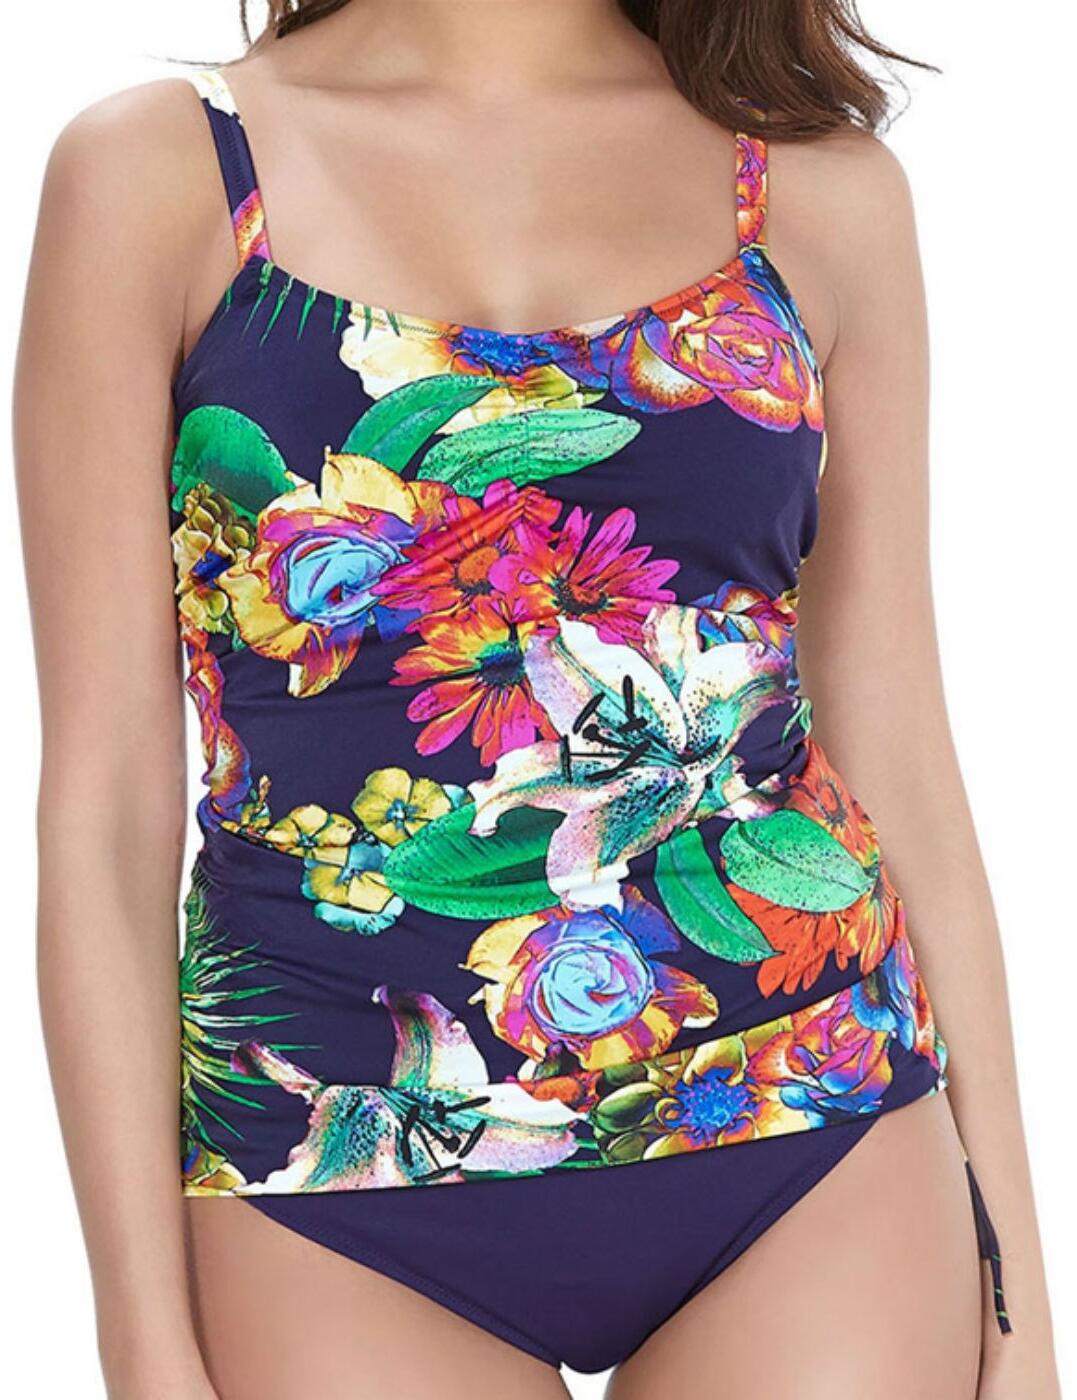 Fantasie Cayman Adjustable Tankini Top 6185 New Underwired Womens ...